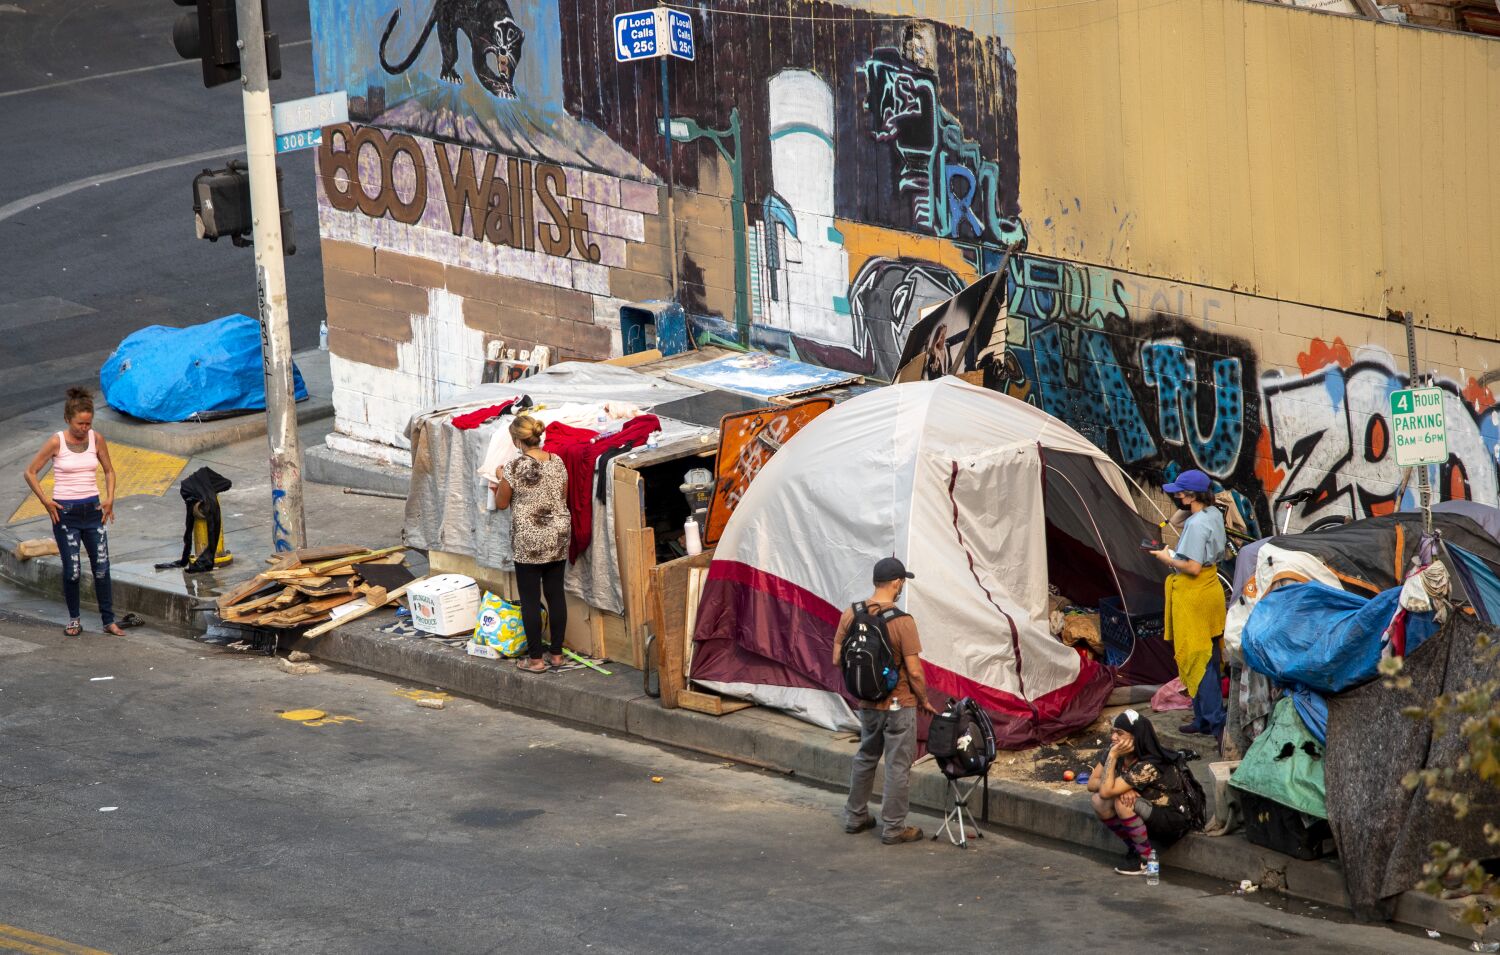 L.A. County poised to declare state of emergency over homelessness crisis